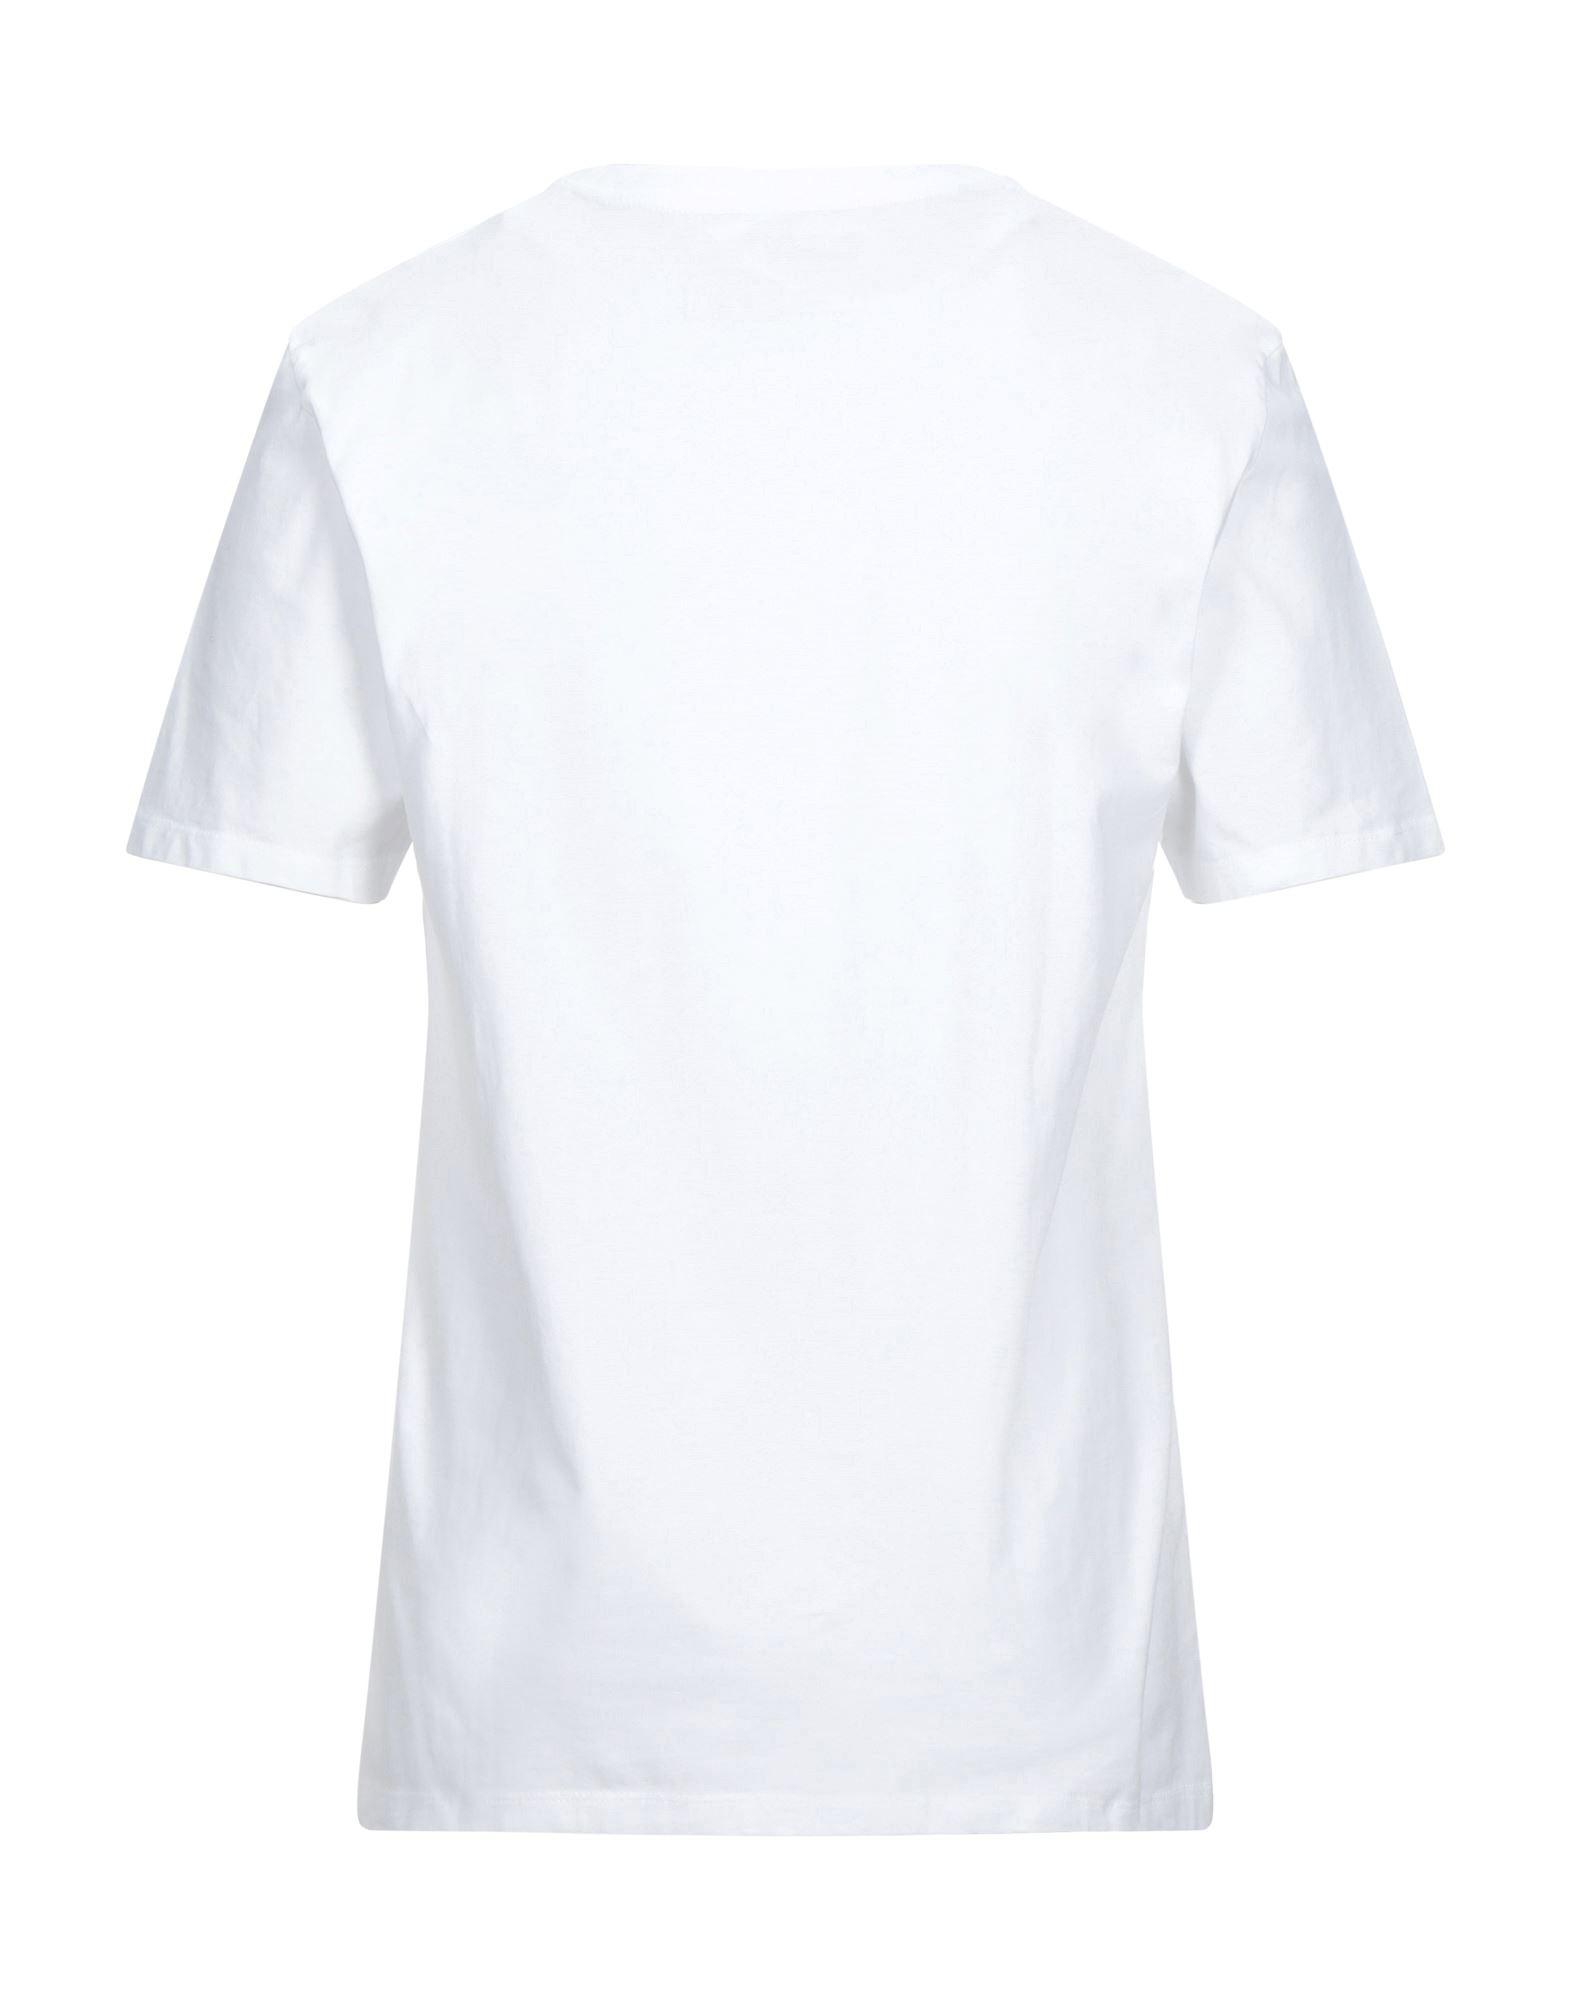 Timberland Cotton T-shirt in White for Men - Lyst